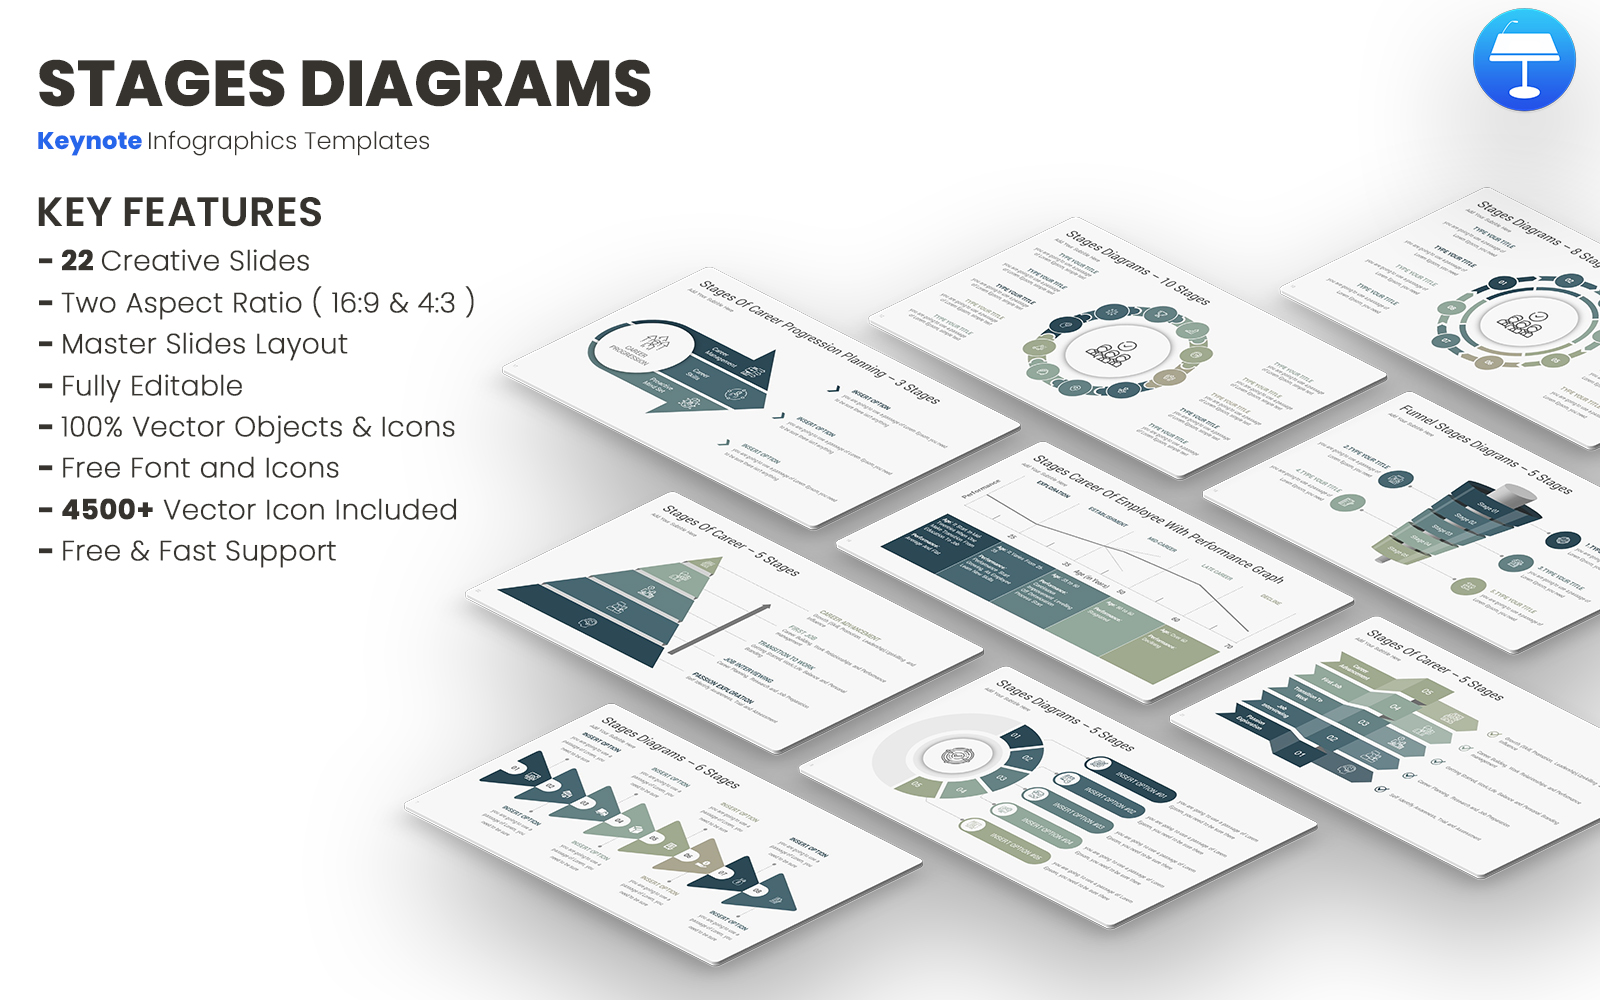 Stages Diagrams Keynote Templates